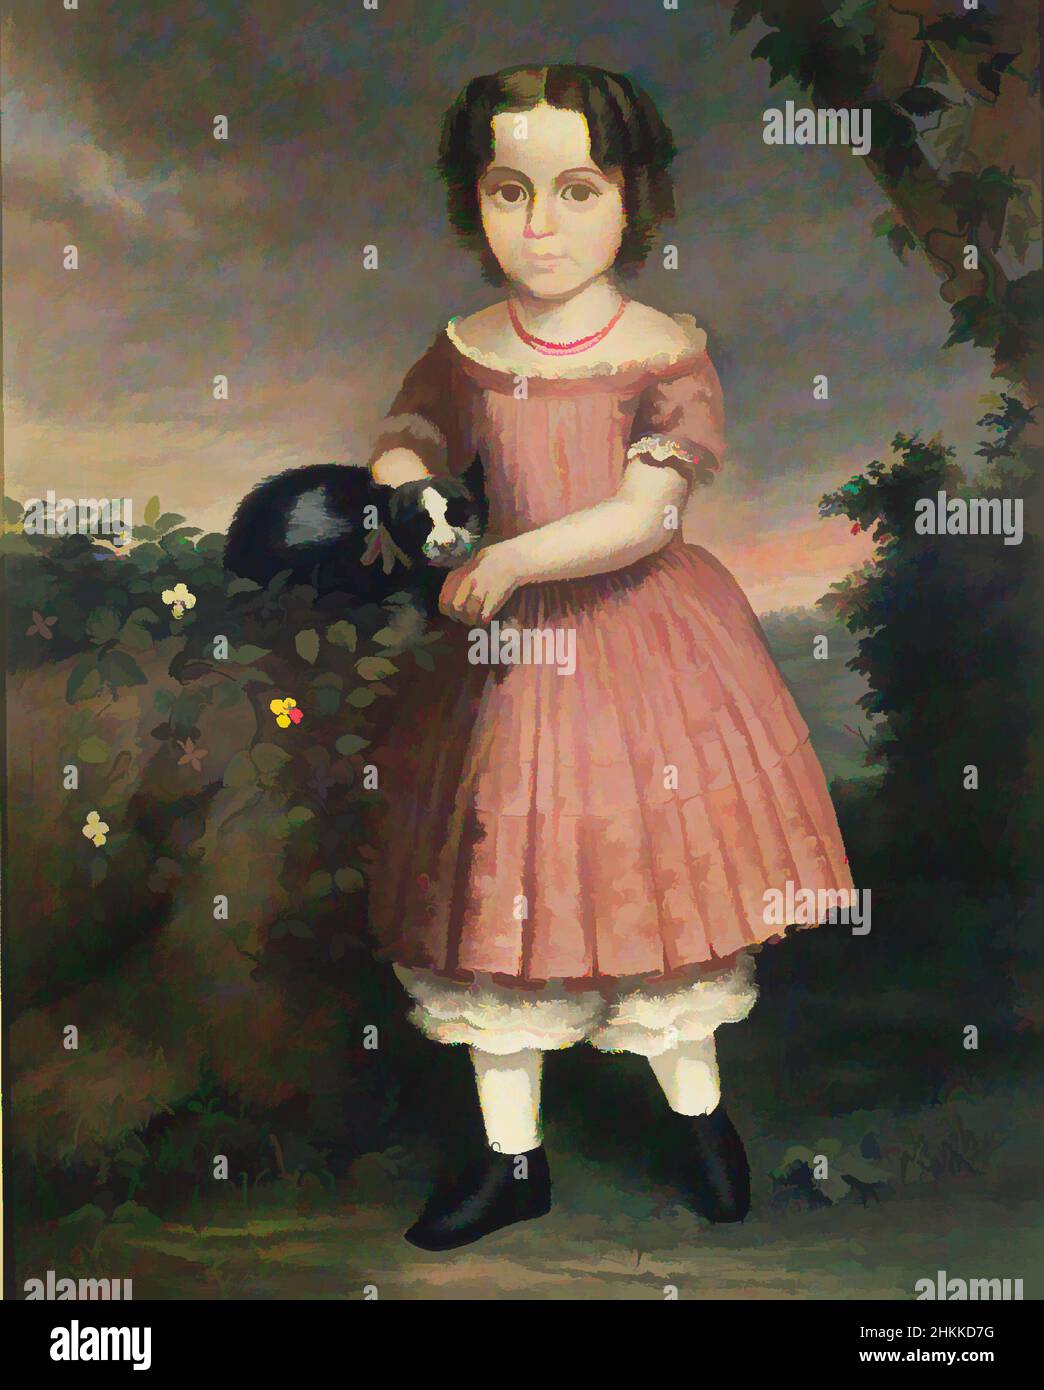 Art inspired by Portrait of a Child Holding a Cat, Probably Charles Winter, American, born ca. 1825, Oil on canvas, 1851, 36 3/16 x 29 1/8 in., 91.9 x 73.9 cm, American, black cat, bloomers, Cane Acres Plantation House, cat, cats, Charles Winter, childhood, domestic cat, early American, Classic works modernized by Artotop with a splash of modernity. Shapes, color and value, eye-catching visual impact on art. Emotions through freedom of artworks in a contemporary way. A timeless message pursuing a wildly creative new direction. Artists turning to the digital medium and creating the Artotop NFT Stock Photo